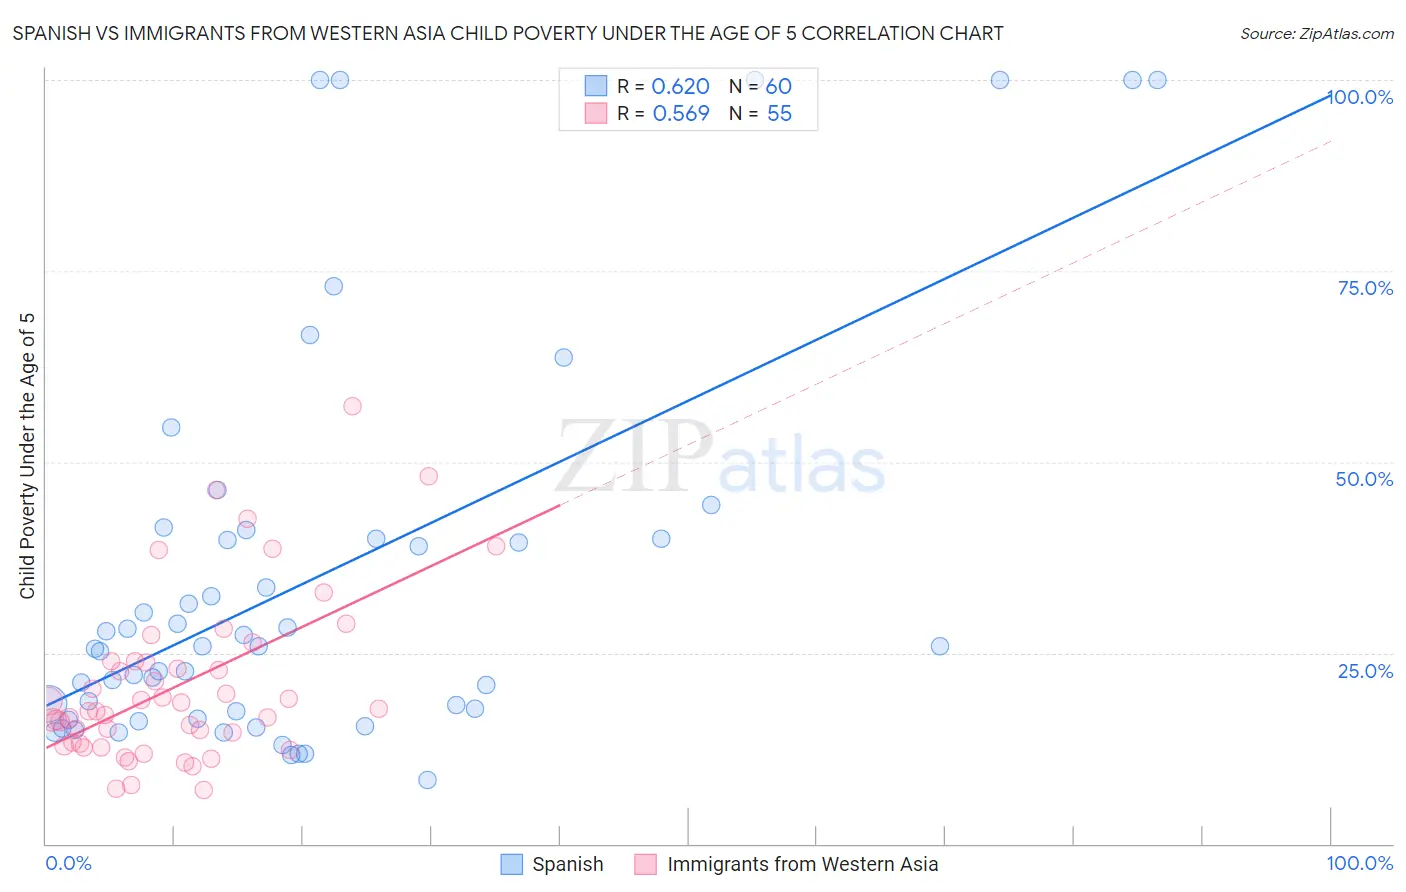 Spanish vs Immigrants from Western Asia Child Poverty Under the Age of 5